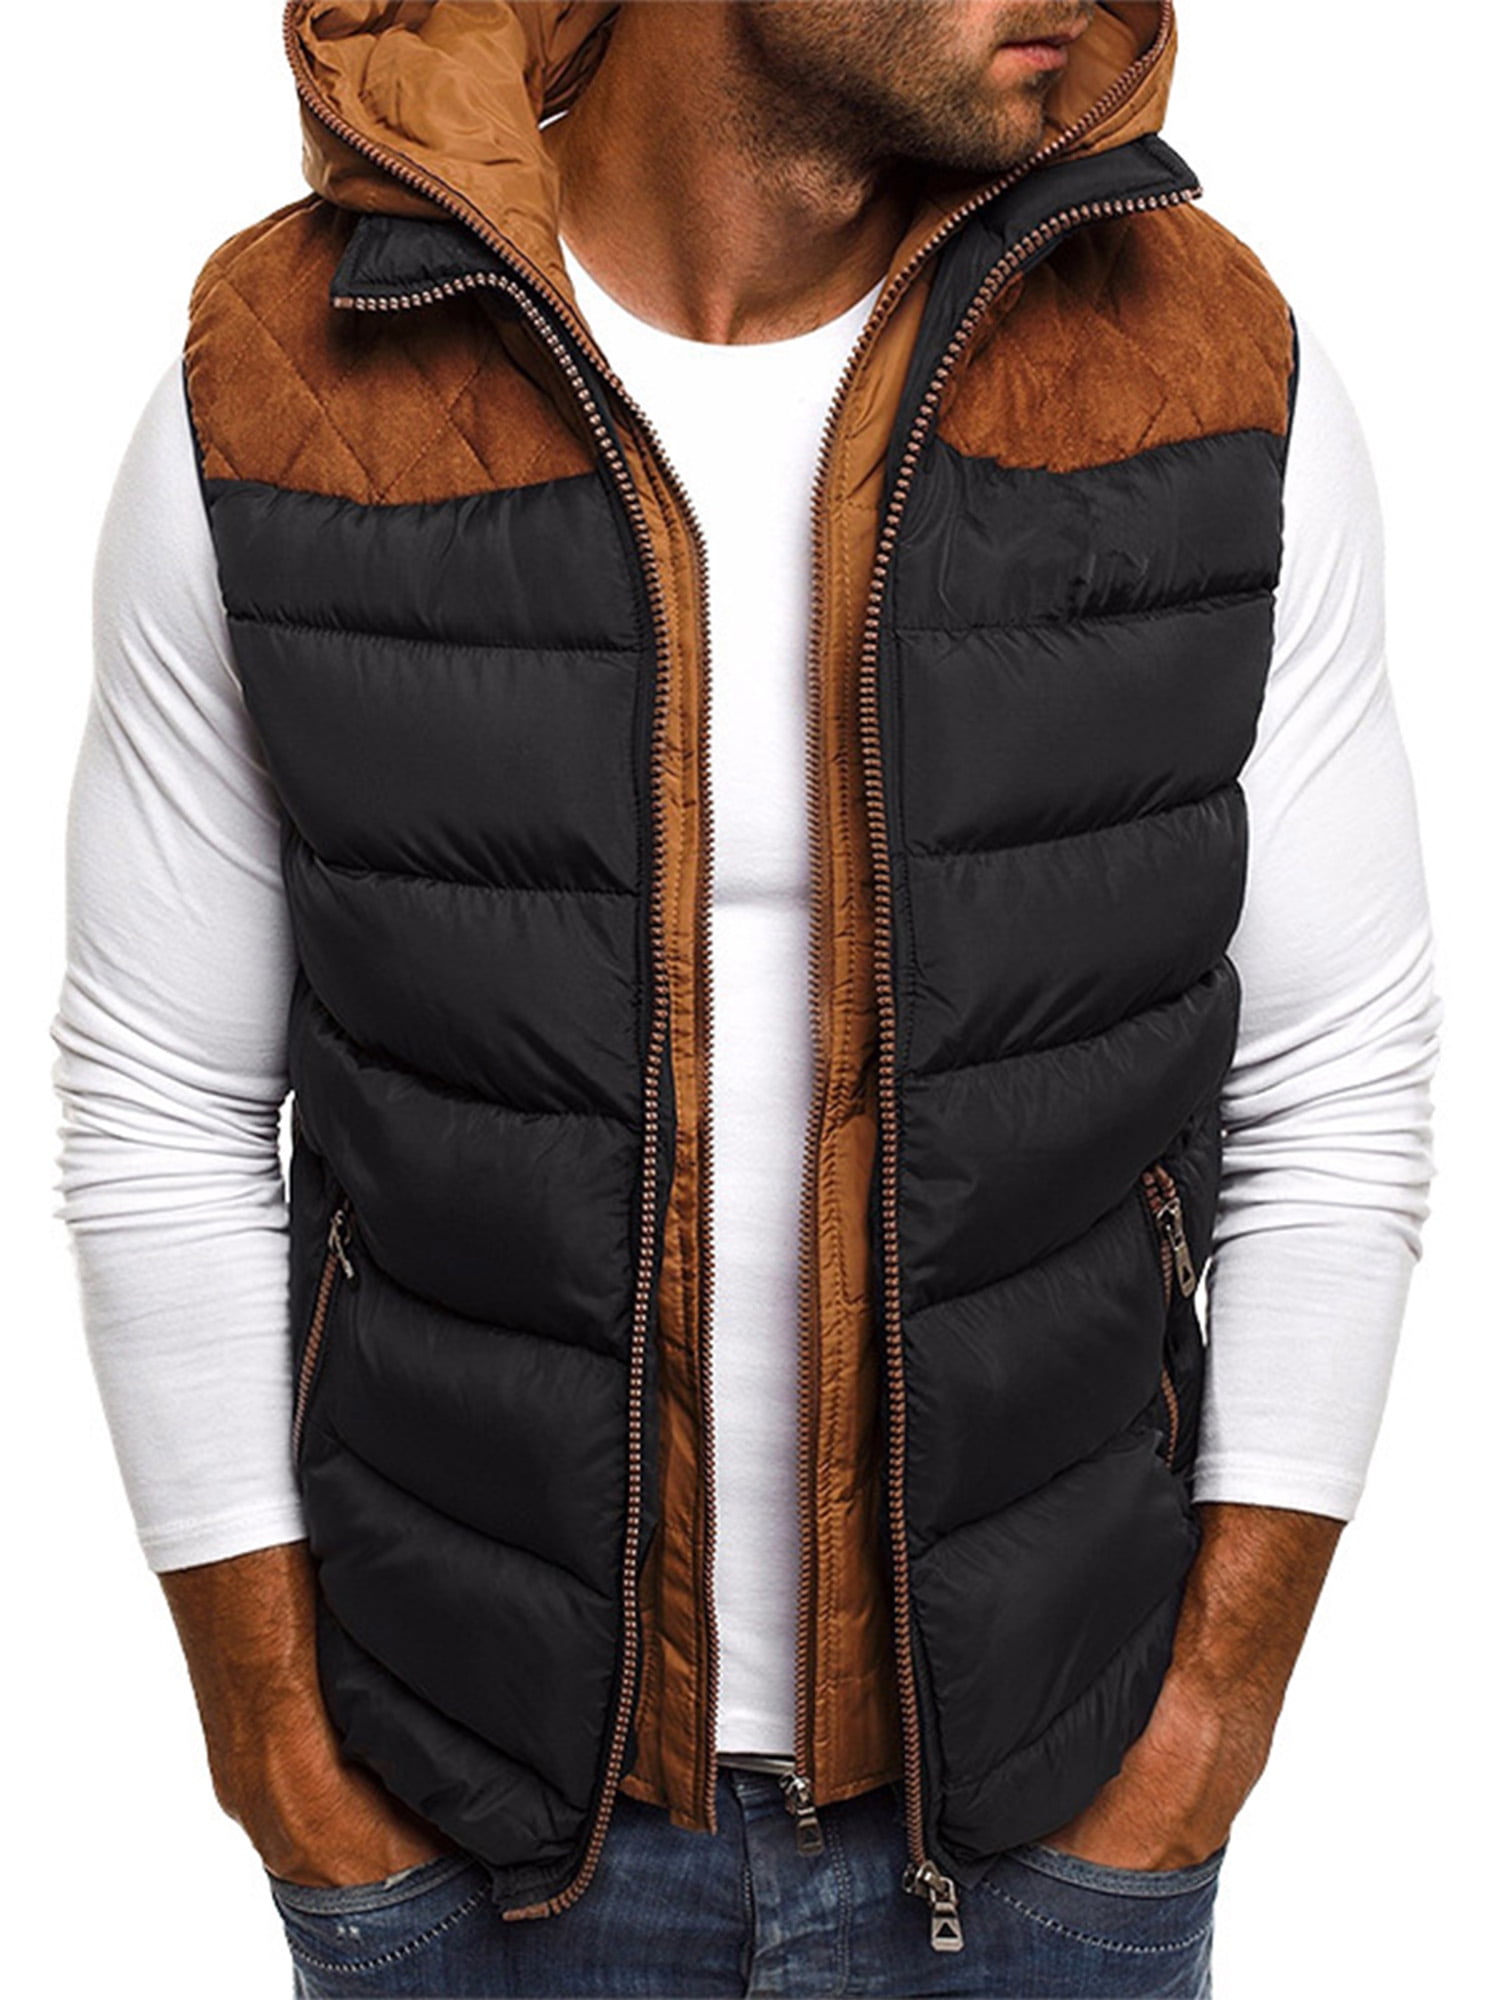 Men'S Sleeveless Puffer Jackets Winter Coat Padded Quilted Zip Vest Outwear Top